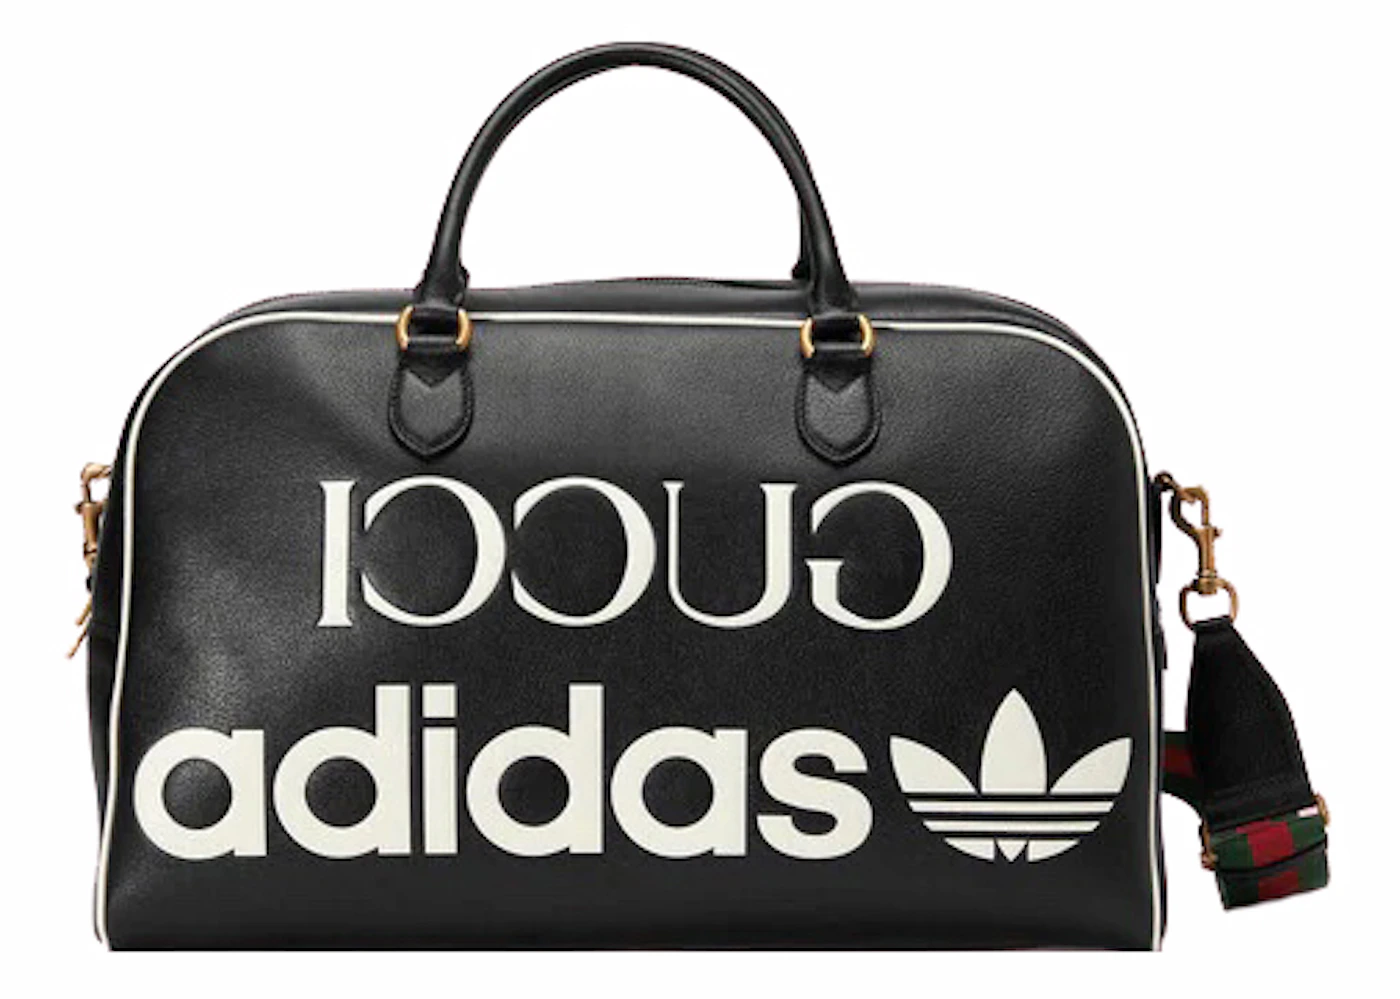 Gold-tone with adidas x Black Bag US Leather Duffle in - Gucci Large